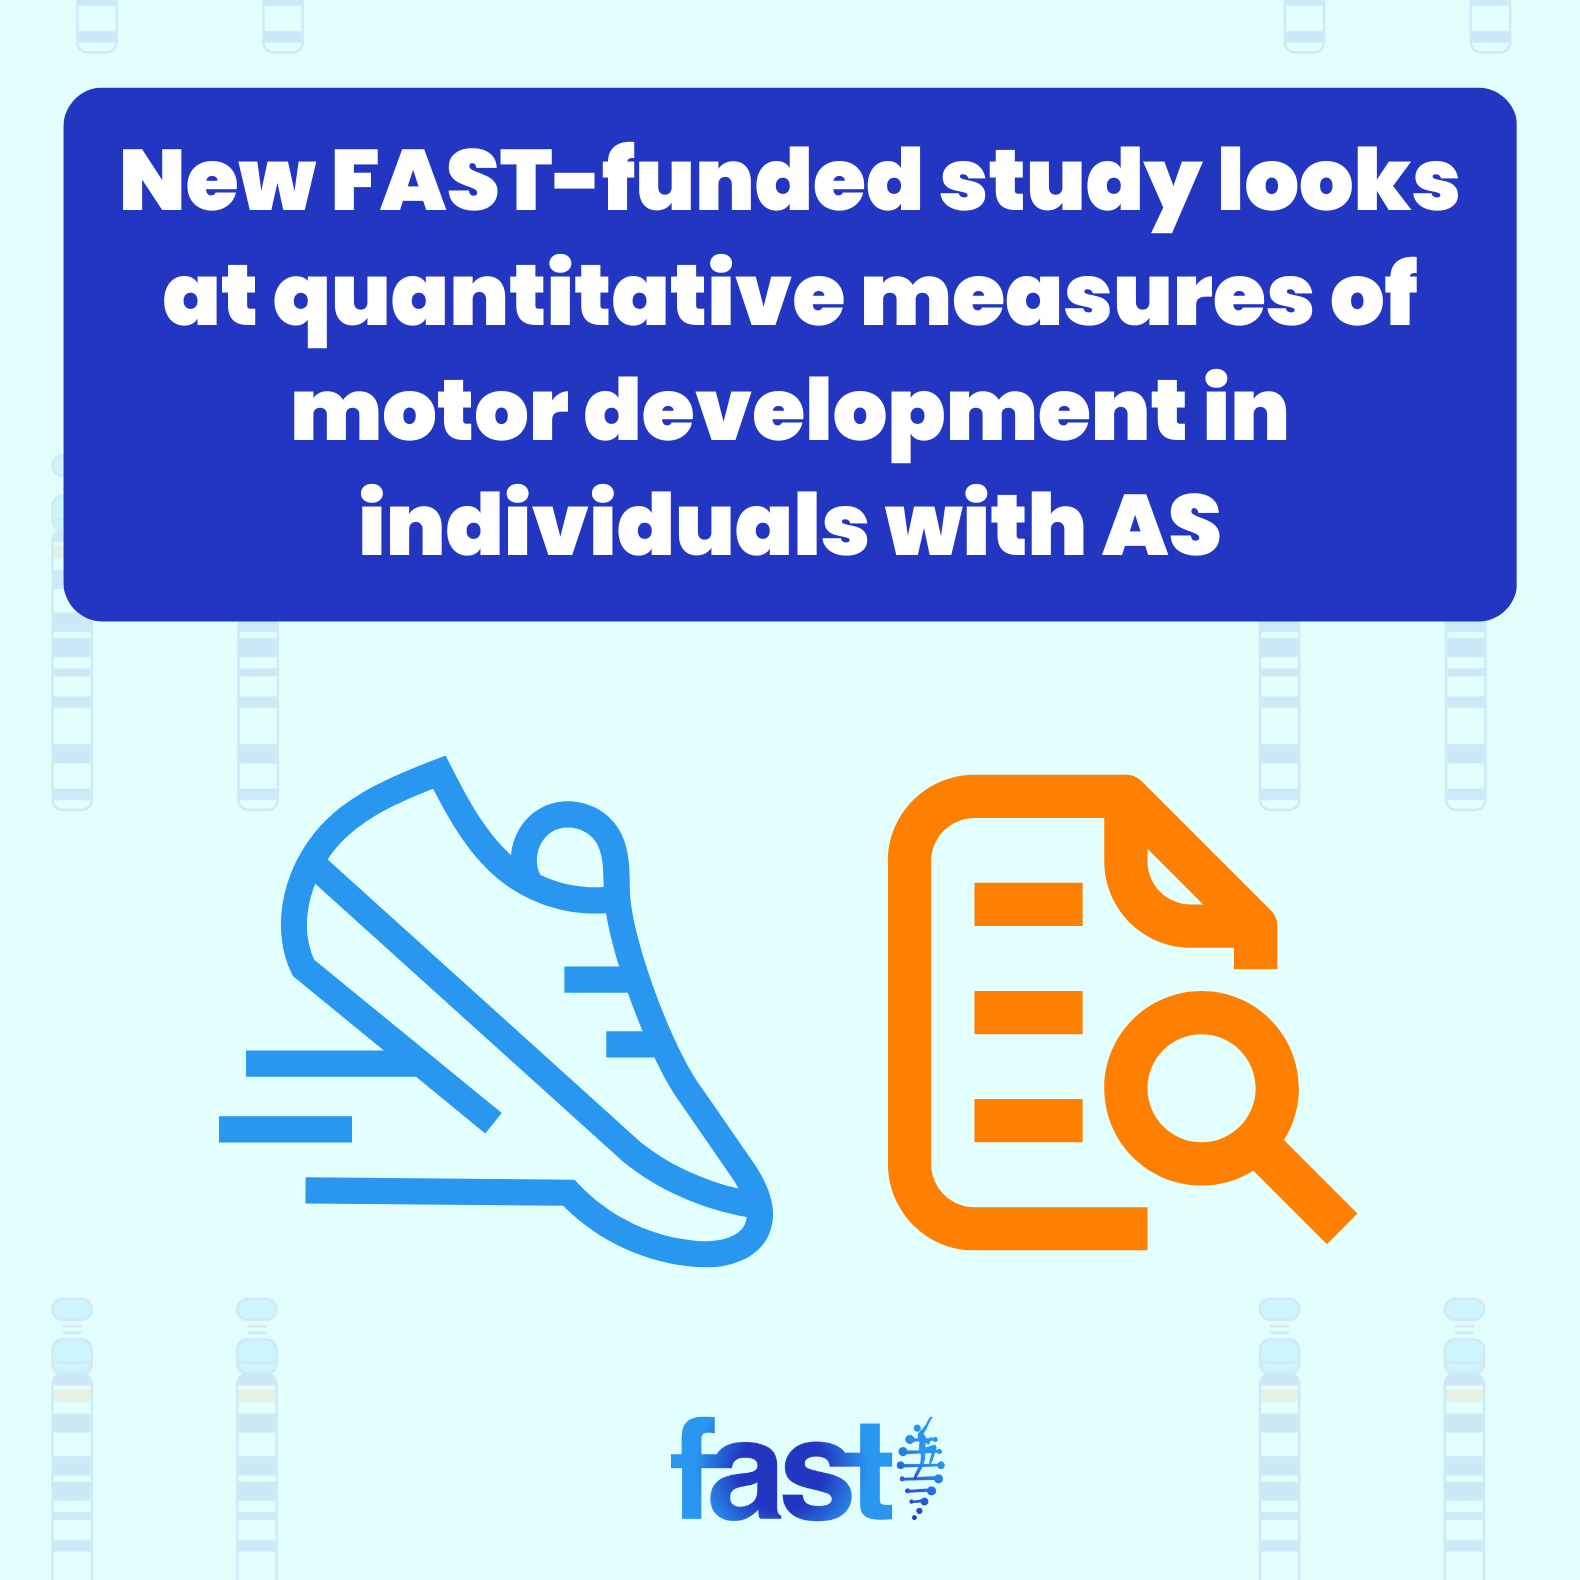 New FAST-funded study looks at quantitative measures of motor development in individuals with AS, with images of a shoe and a research paper